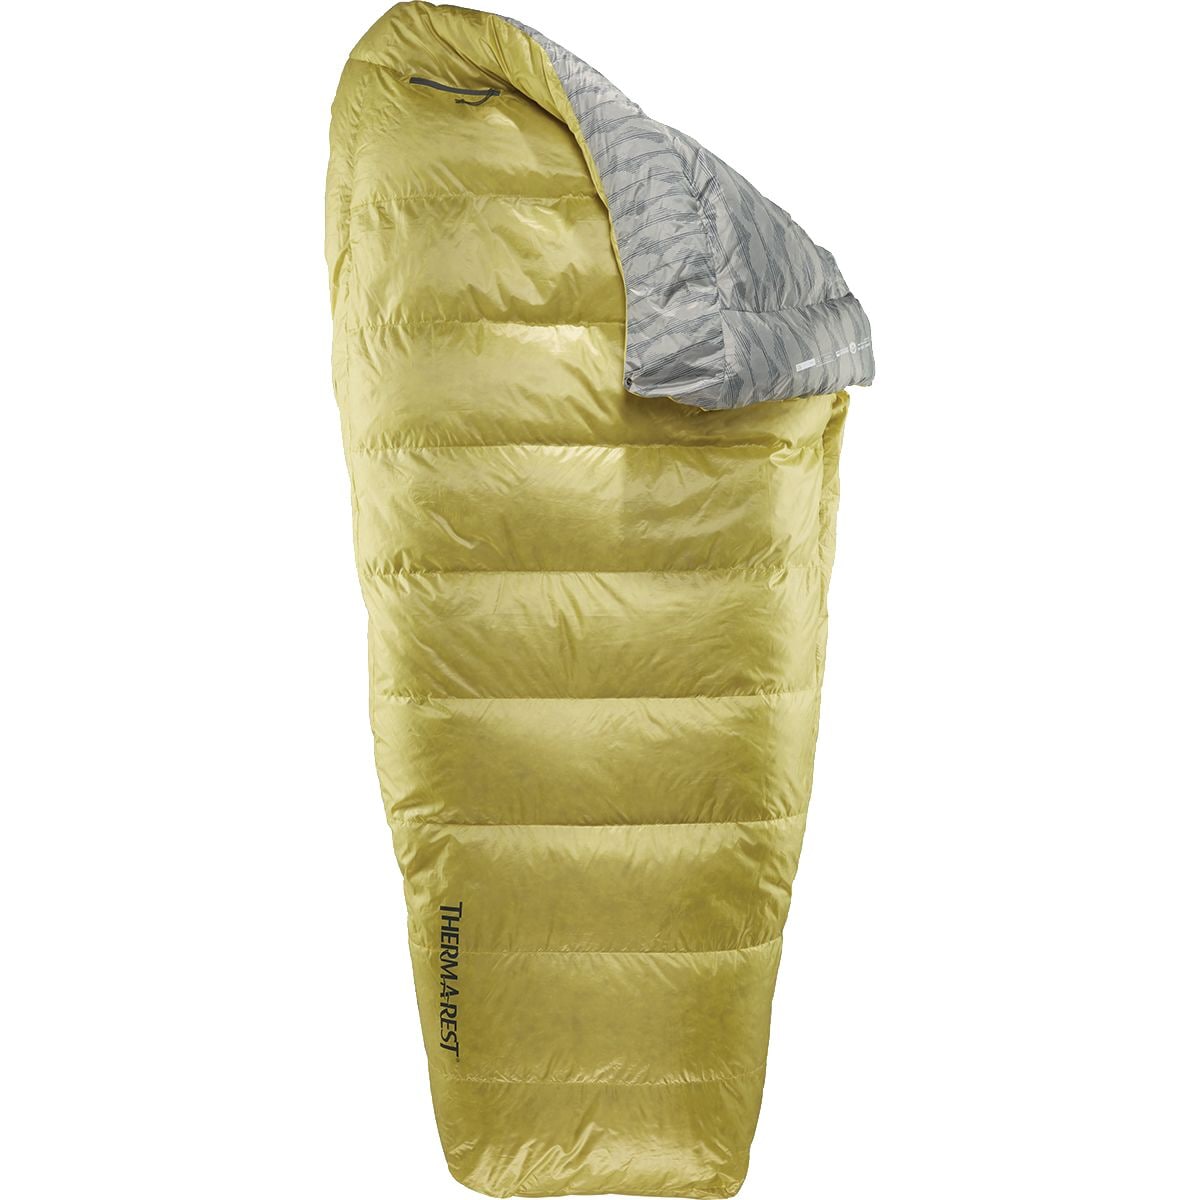 Therm-a-Rest Corus HD Quilt: 32F Down